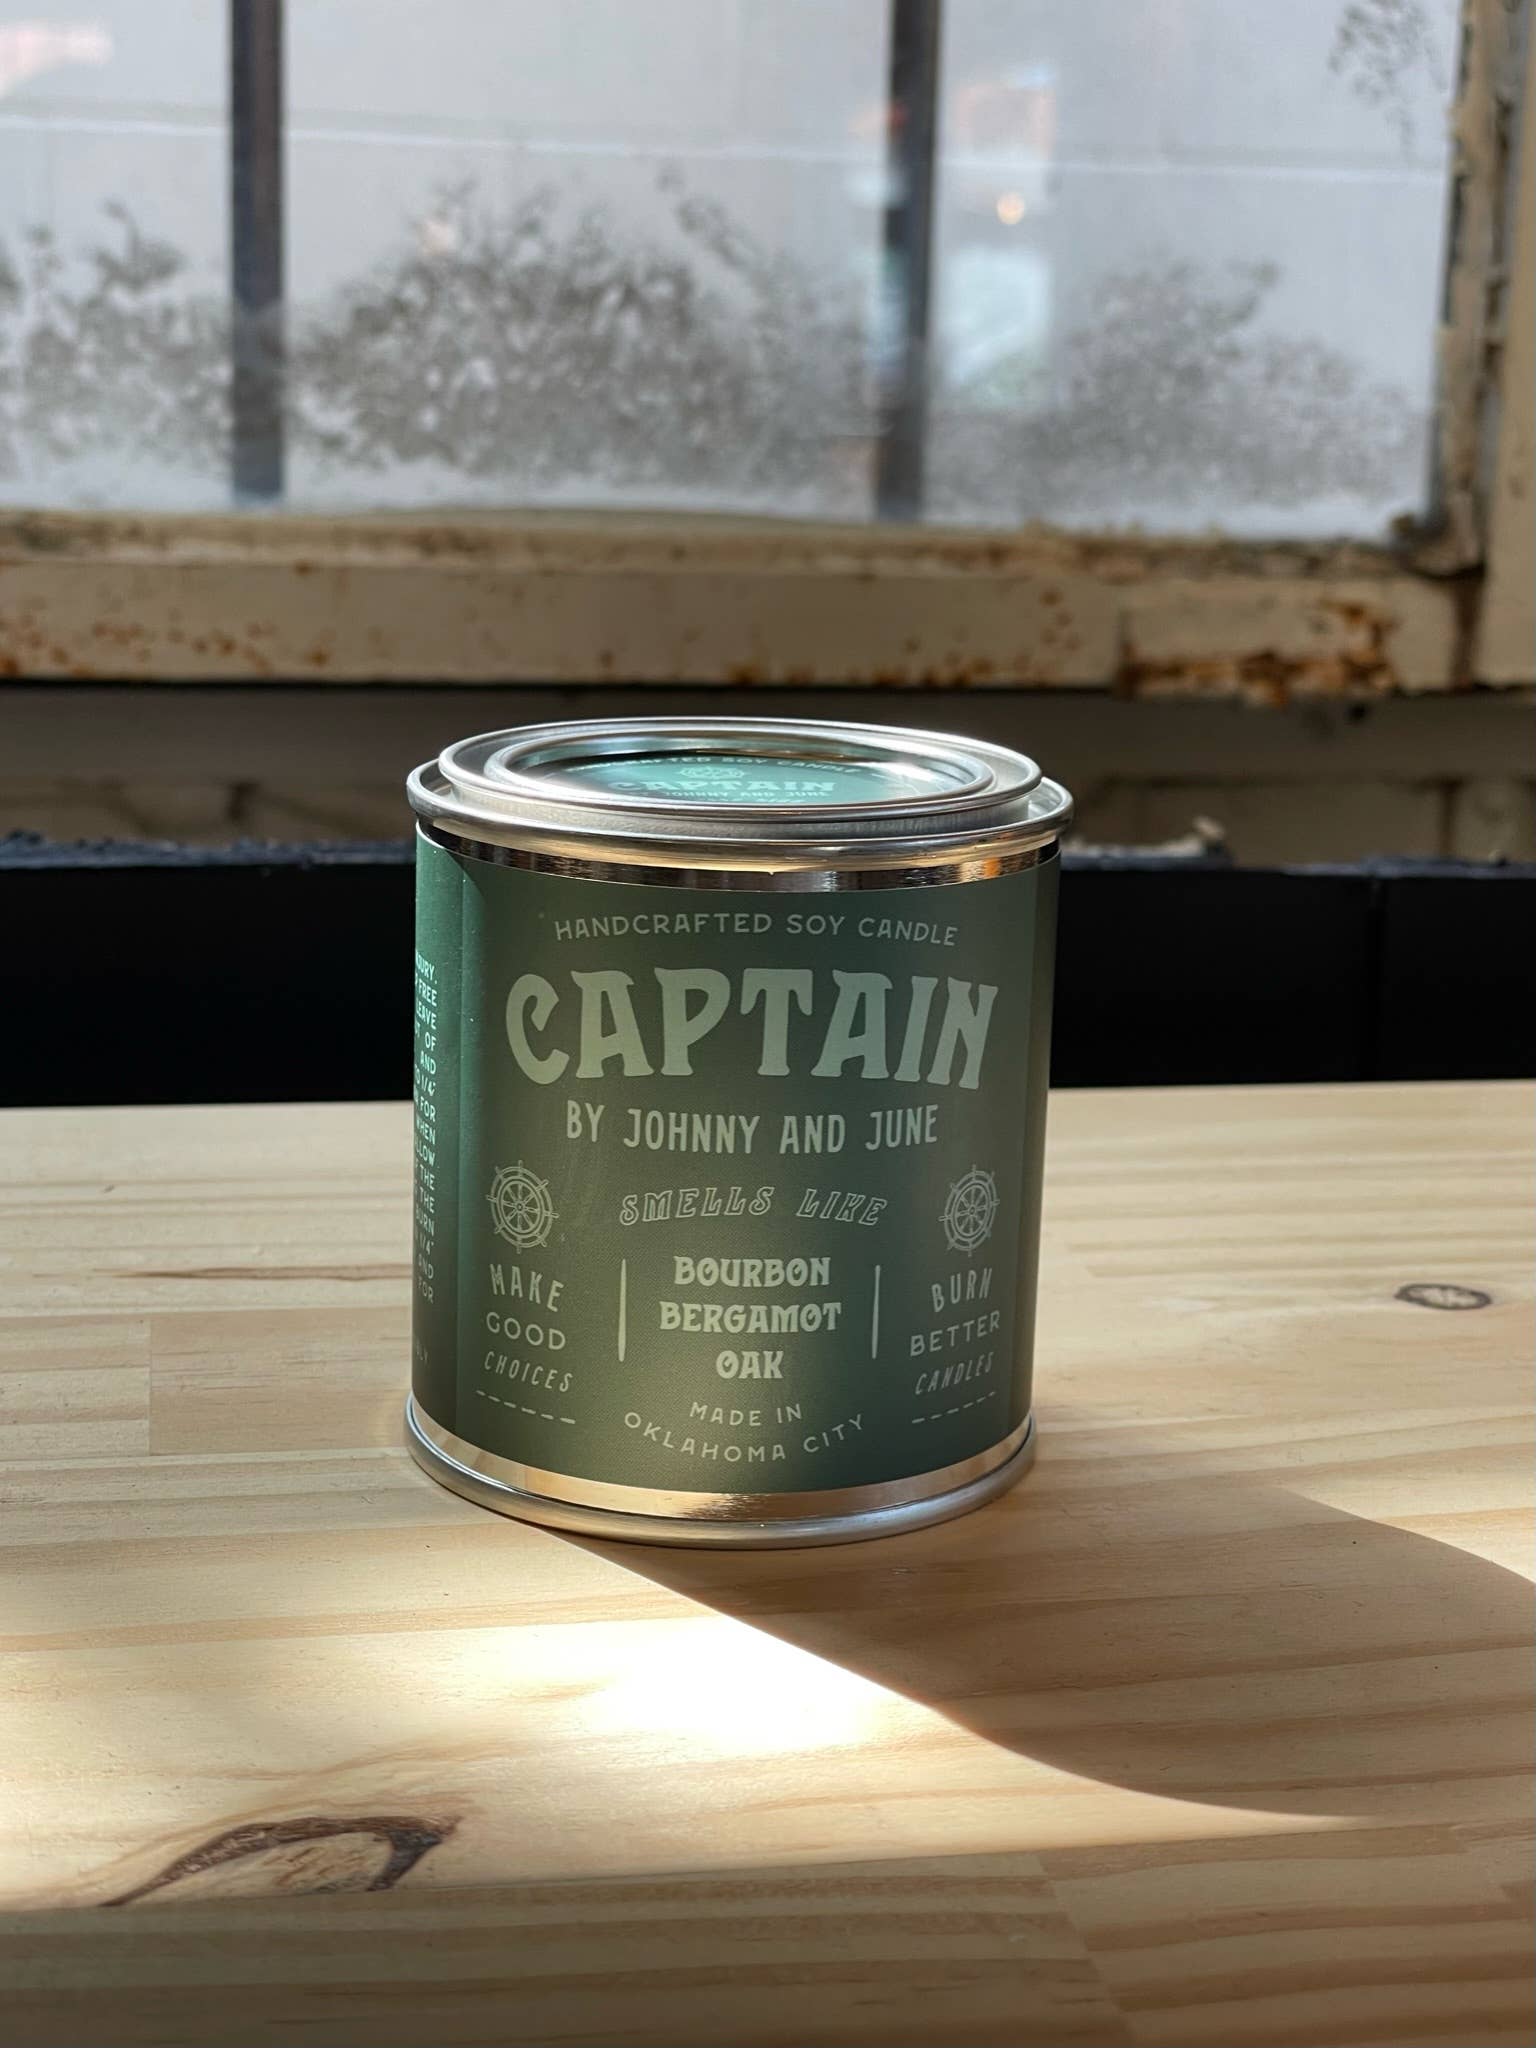 Captain Tin Soy Candle